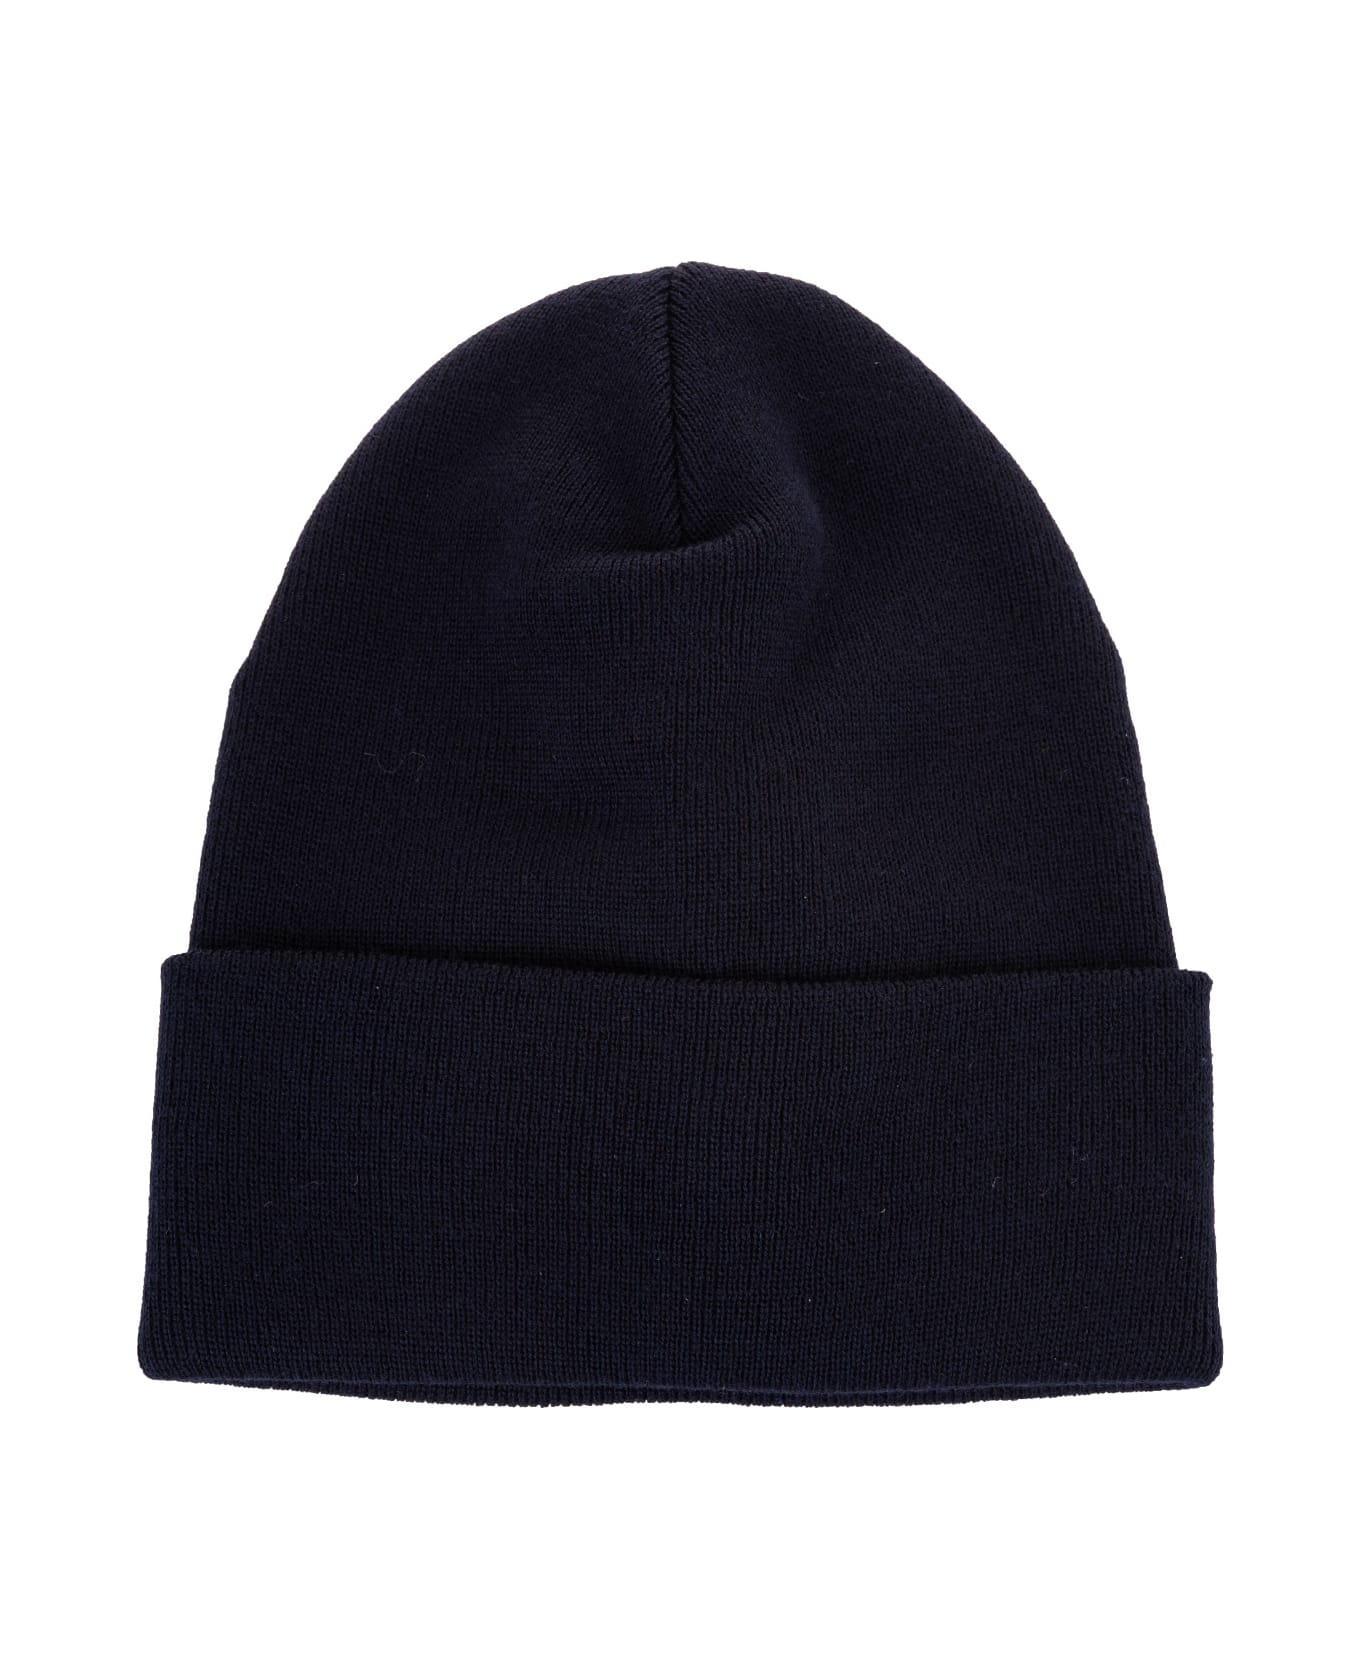 Moncler Grenoble Navy Blue Pure Wool Hat - Blue 帽子